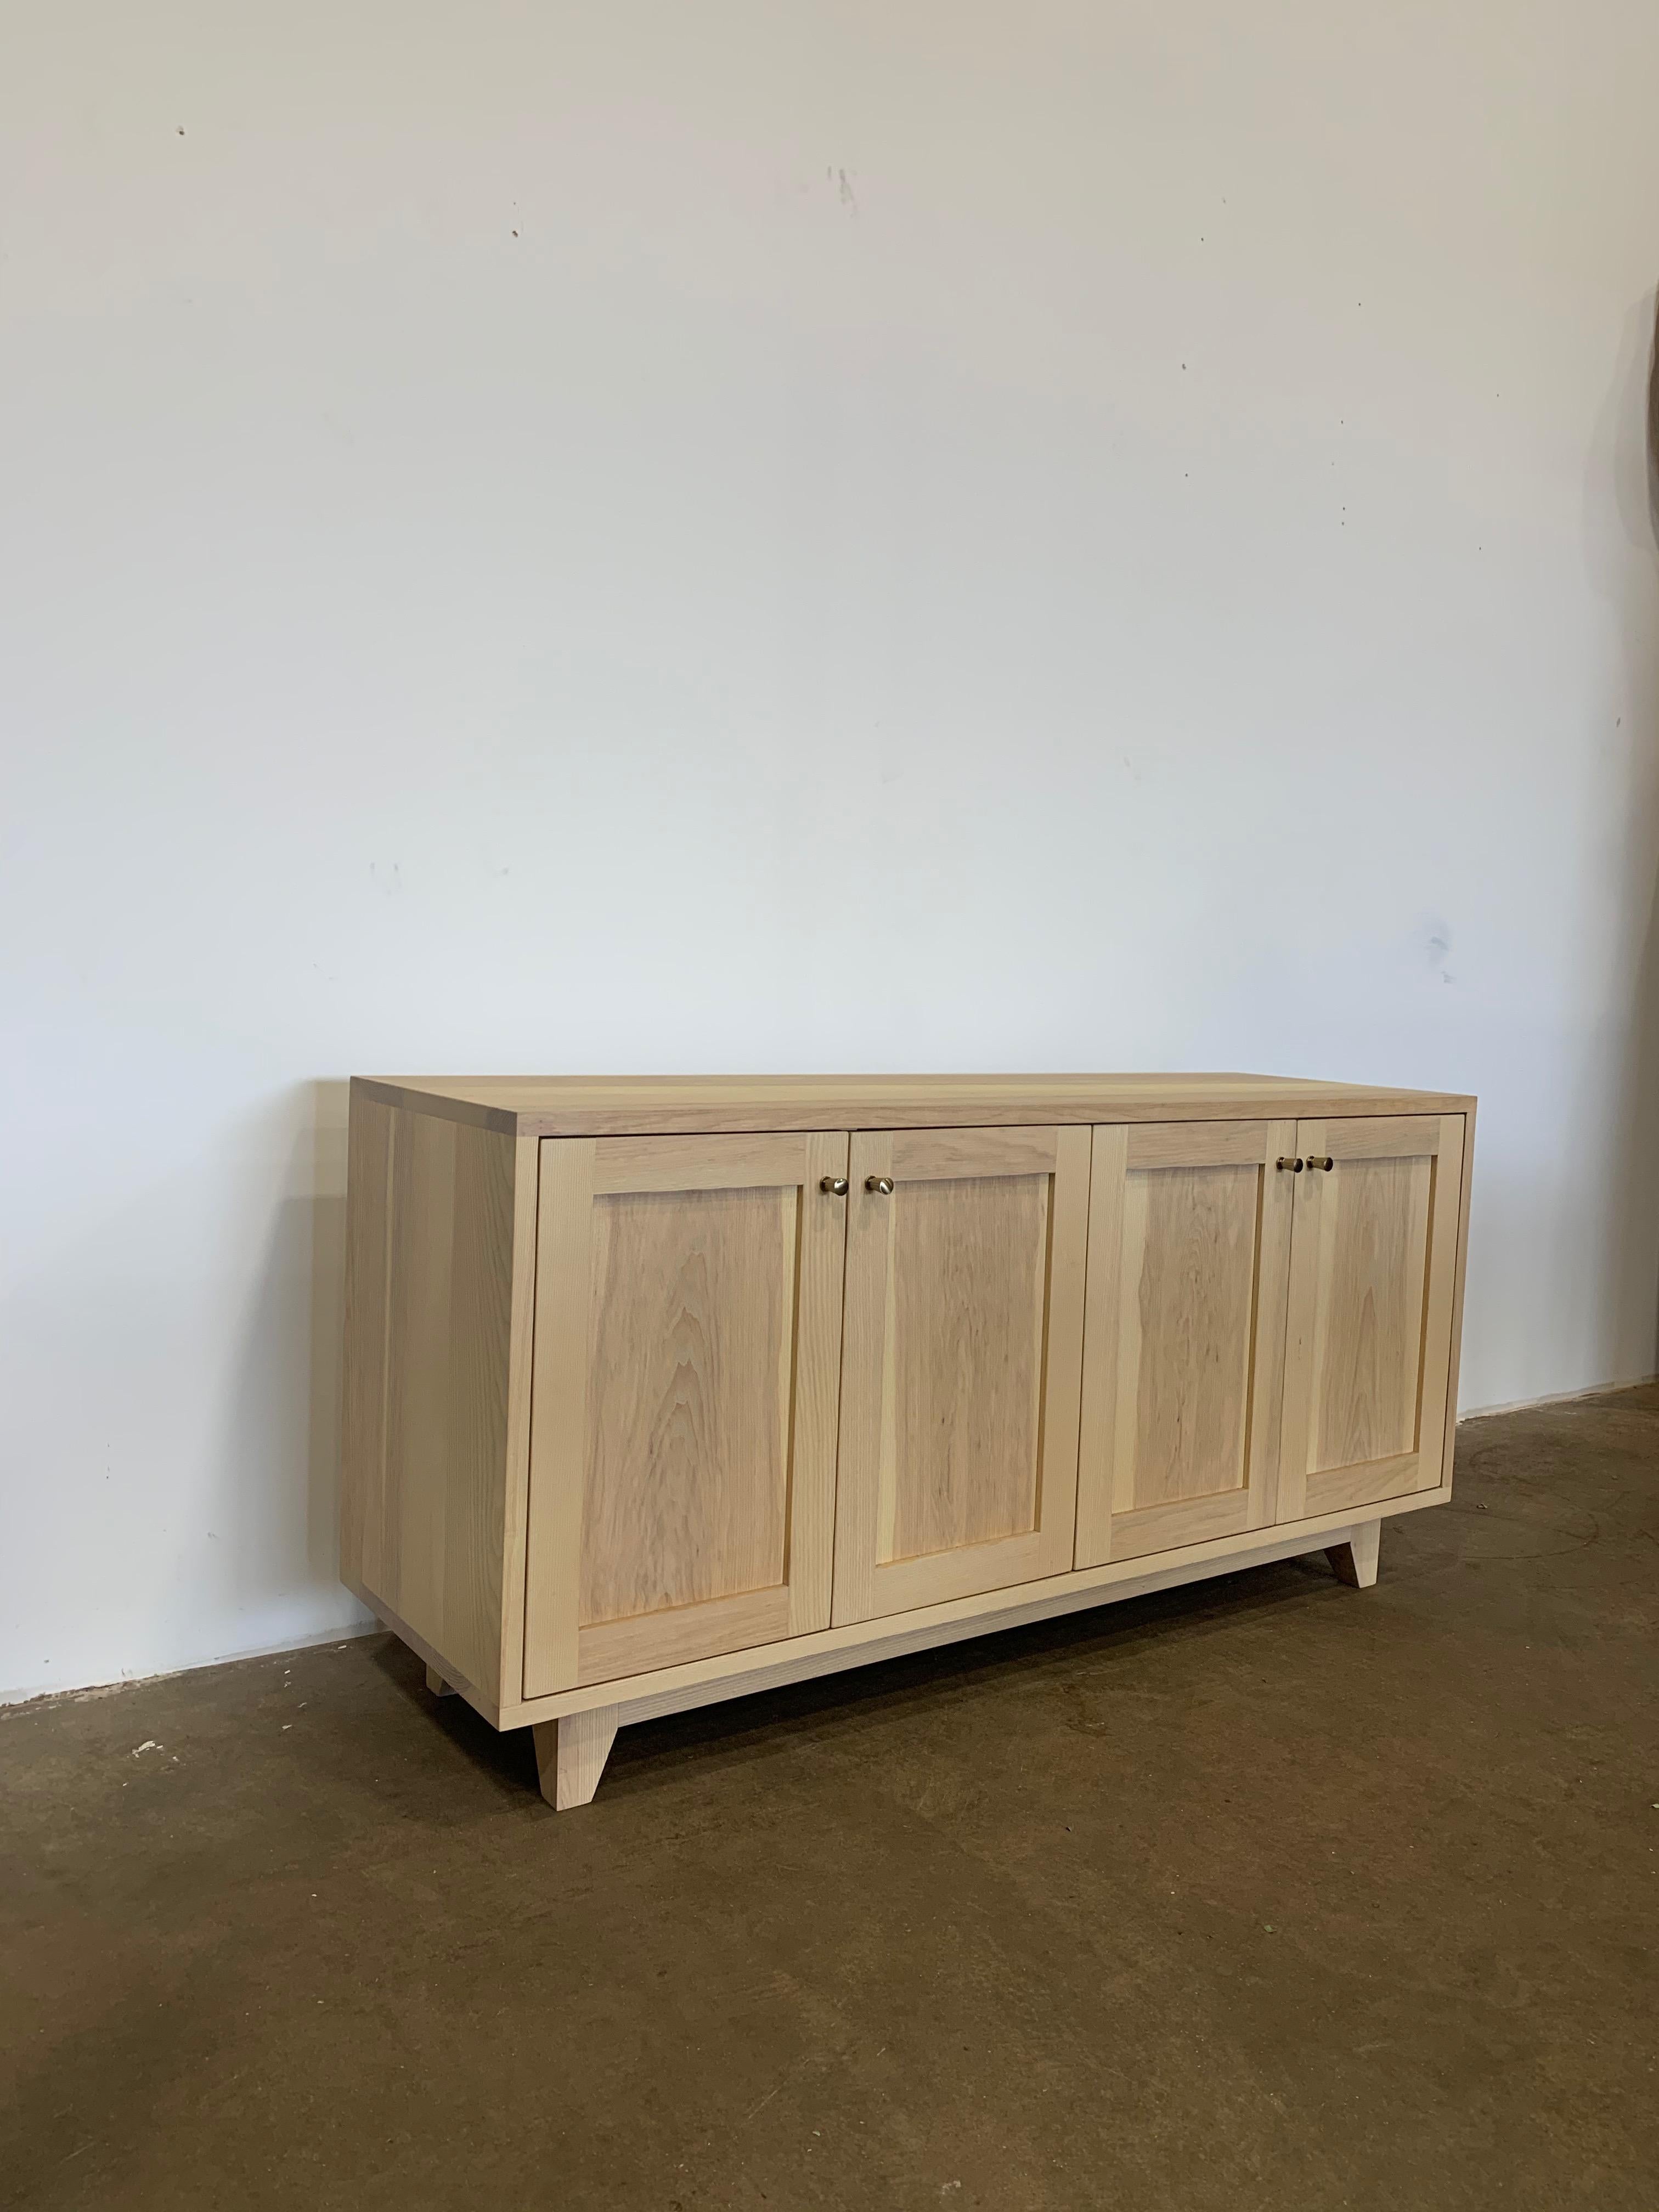 Solid ash console cabinet with white washed finish. 4 solid recessed panel doors with 2 adjustable shelves. Really happy with the base on this cabinet as well. This was a sample piece and it has minimal wear and is in excellent condition. 

Size: